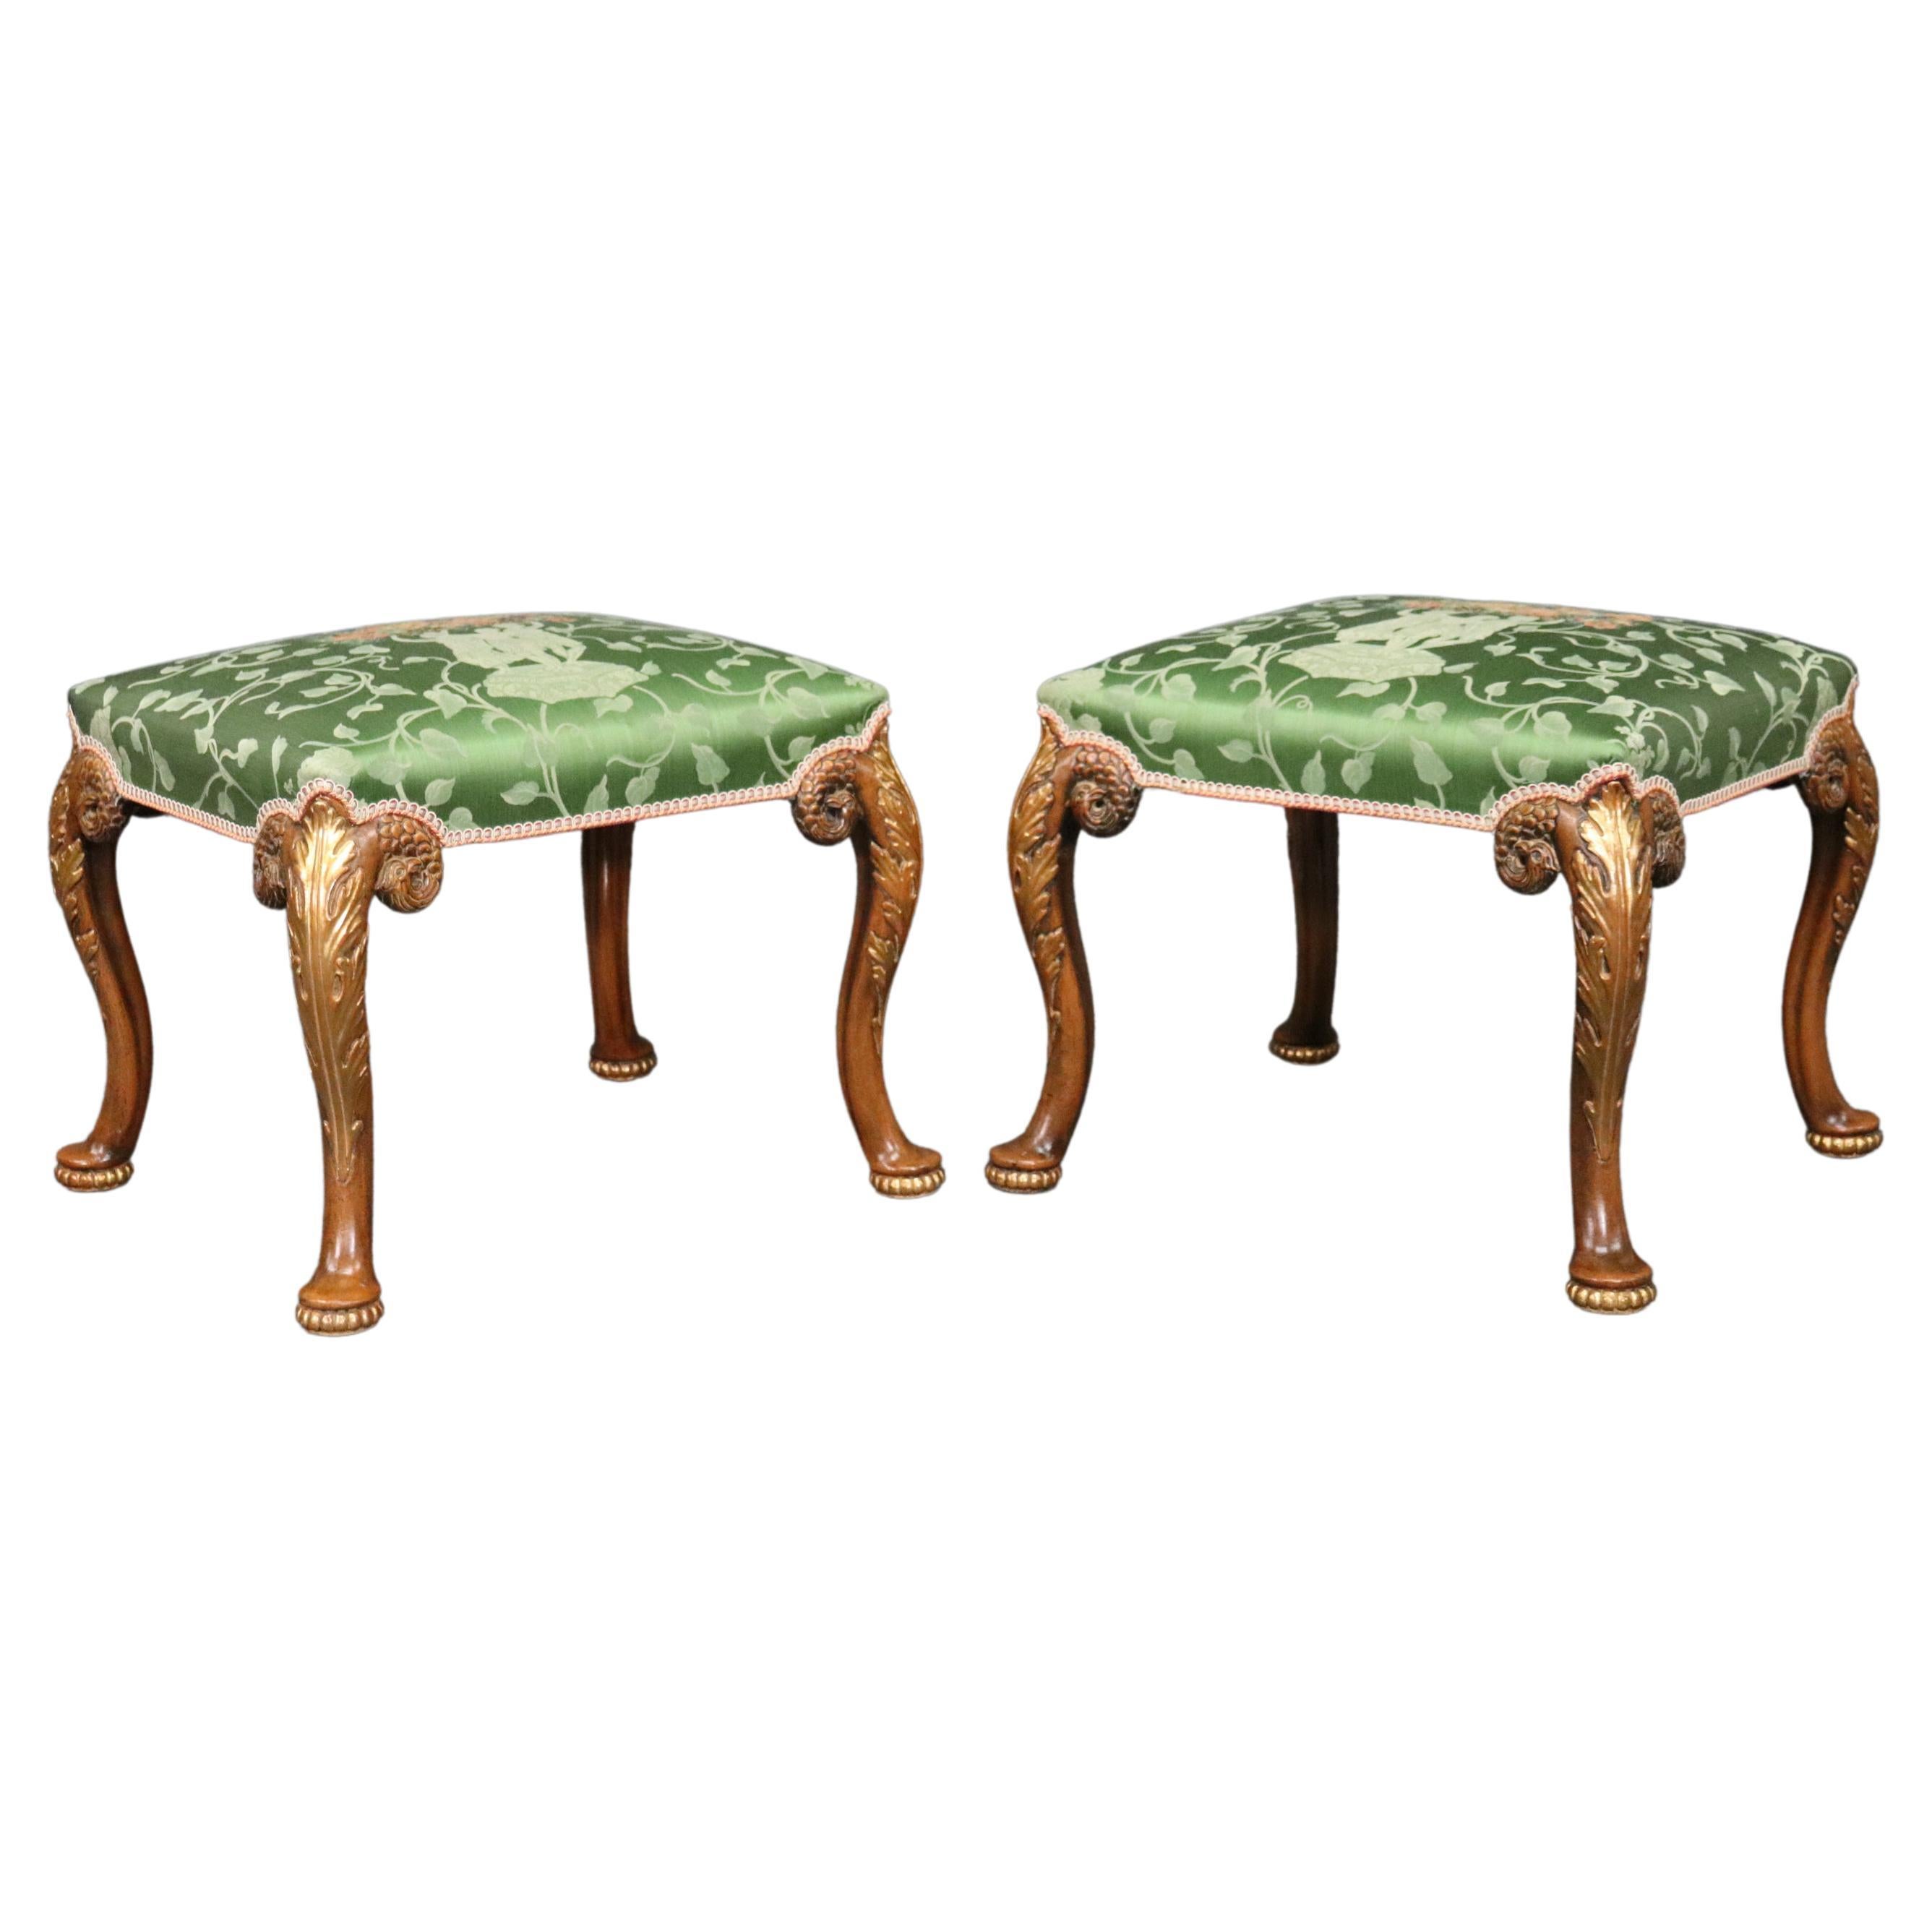 Carved Walnut Georgian Style Pair of Foot Stools Benches, Circa 1920